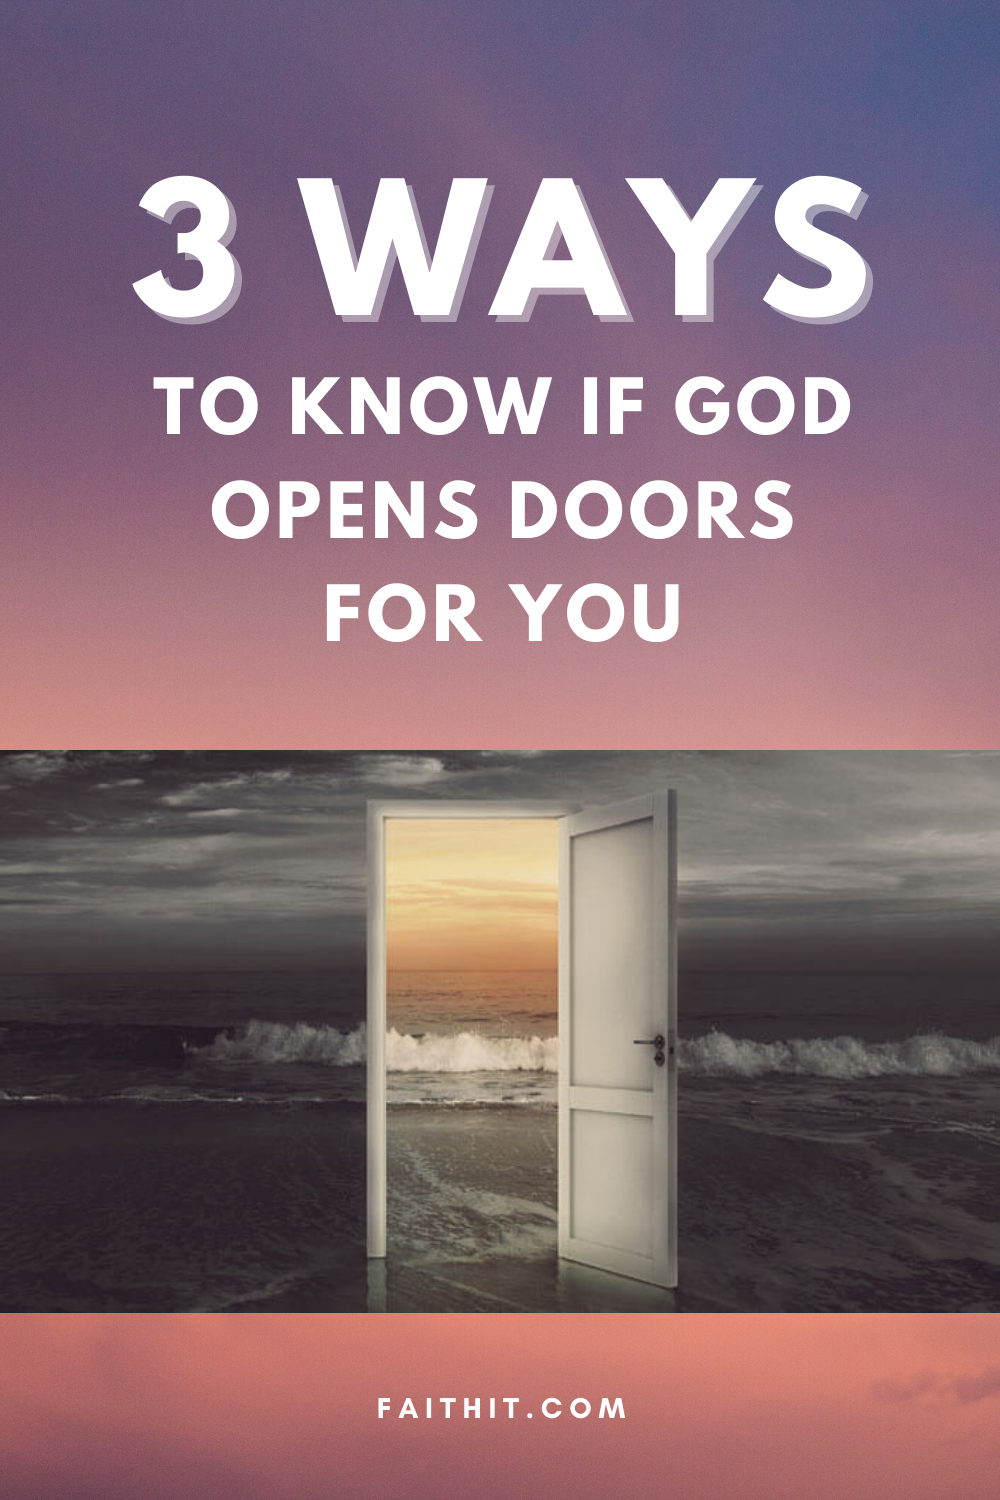 3 Ways To Know If God Opens Doors For You